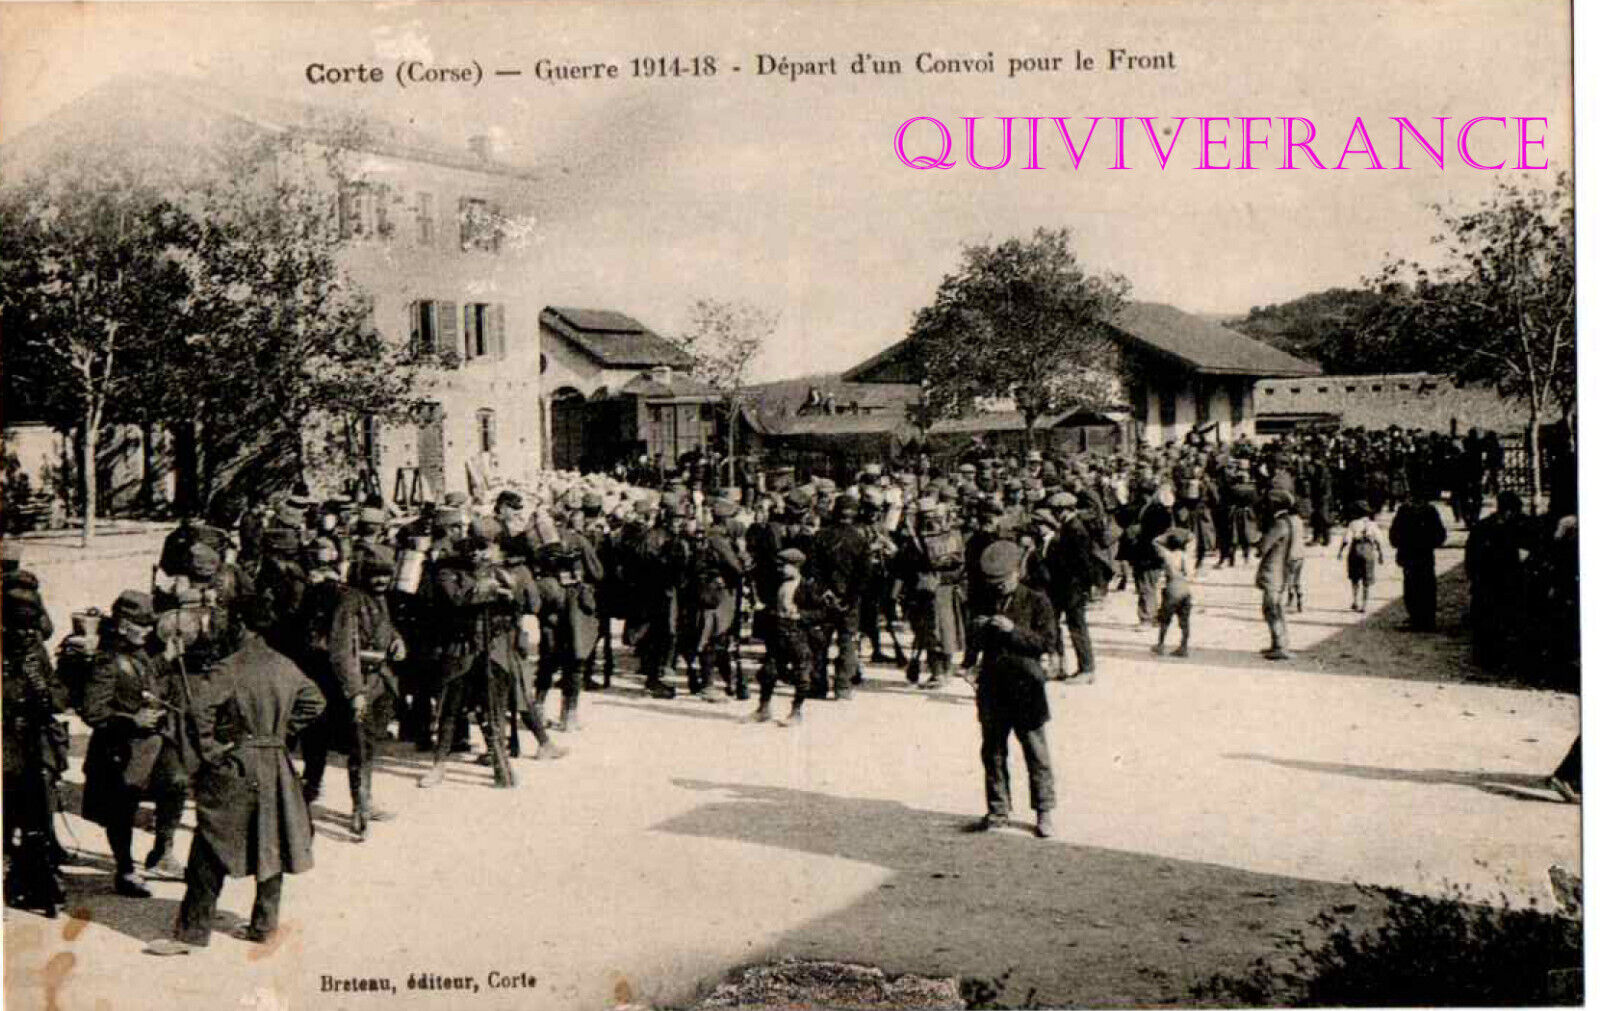 CP3108 - CORSICA CUT - war 1914-1918 Departure of a convoy for the front